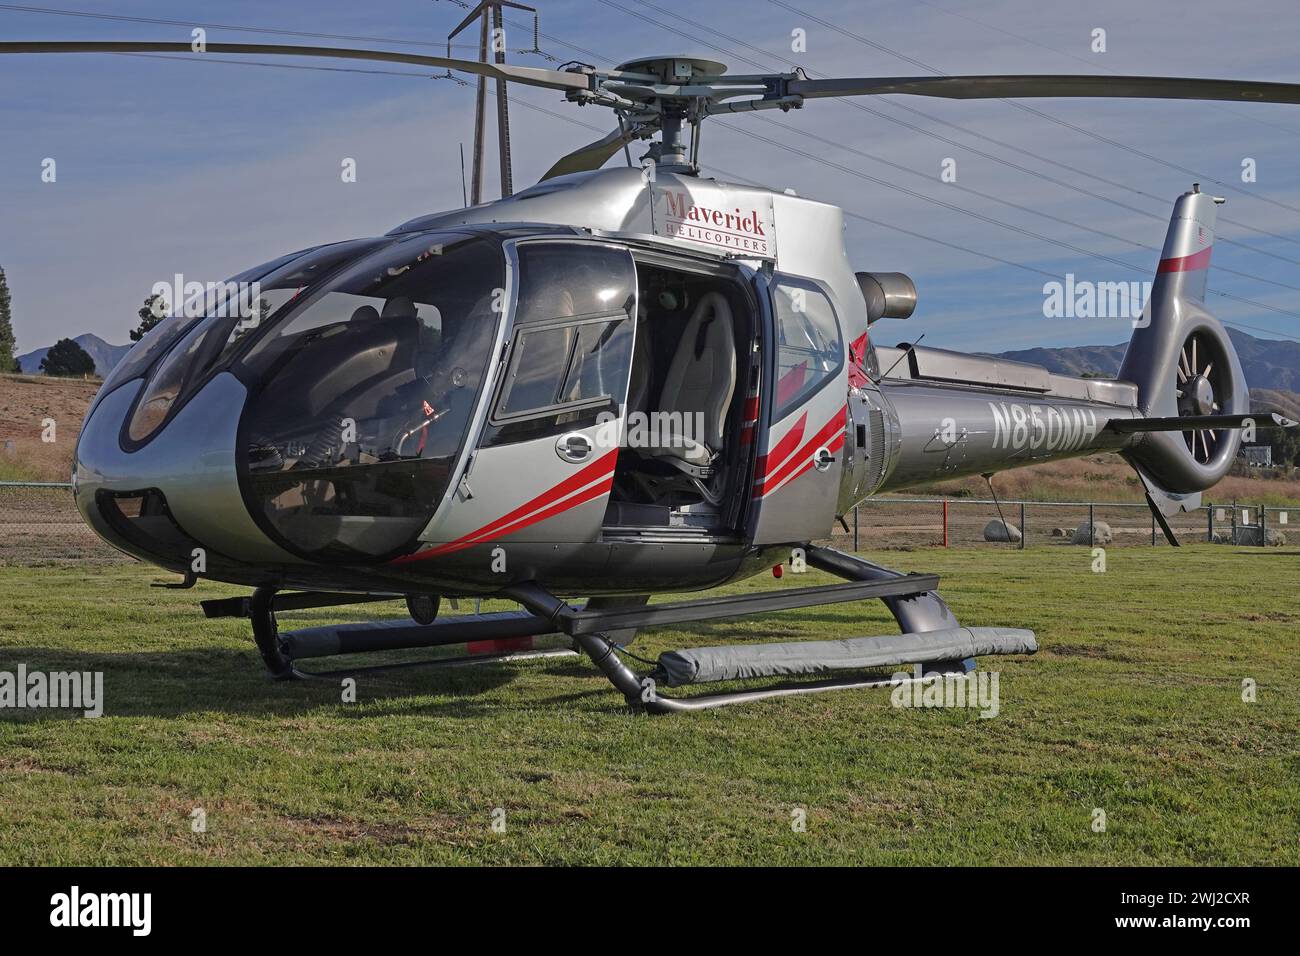 L.A., California, USA - Nov. 4, 2023: An Airbus EC 130 helicopter, operated by Las Vegas-based sightseeing tour company Maverick Helicopters, is shown. Stock Photo